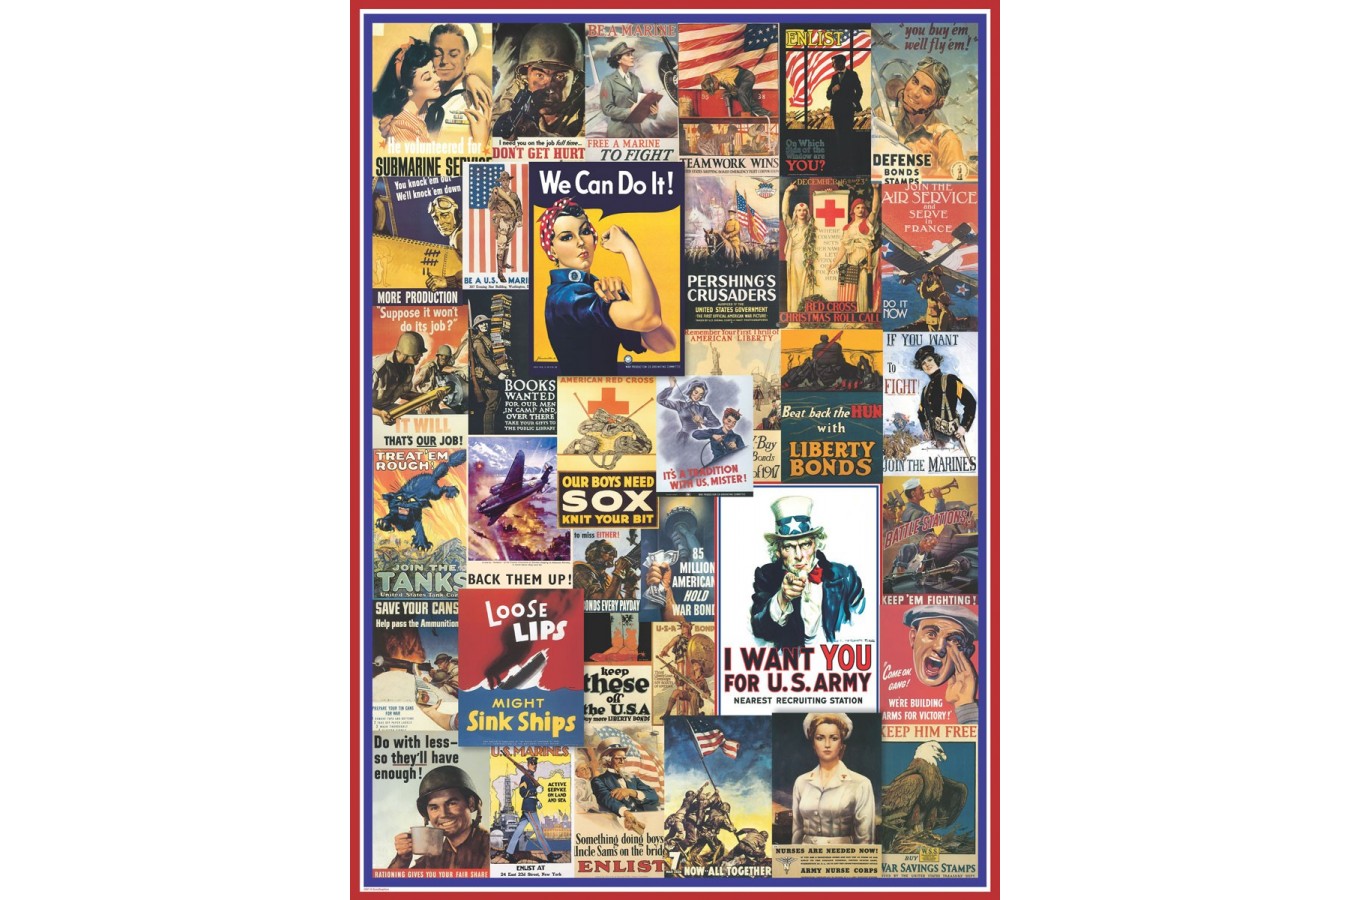 Puzzle Eurographics - World War I & II Vintage Posters, 1000 piese (6000-0937)